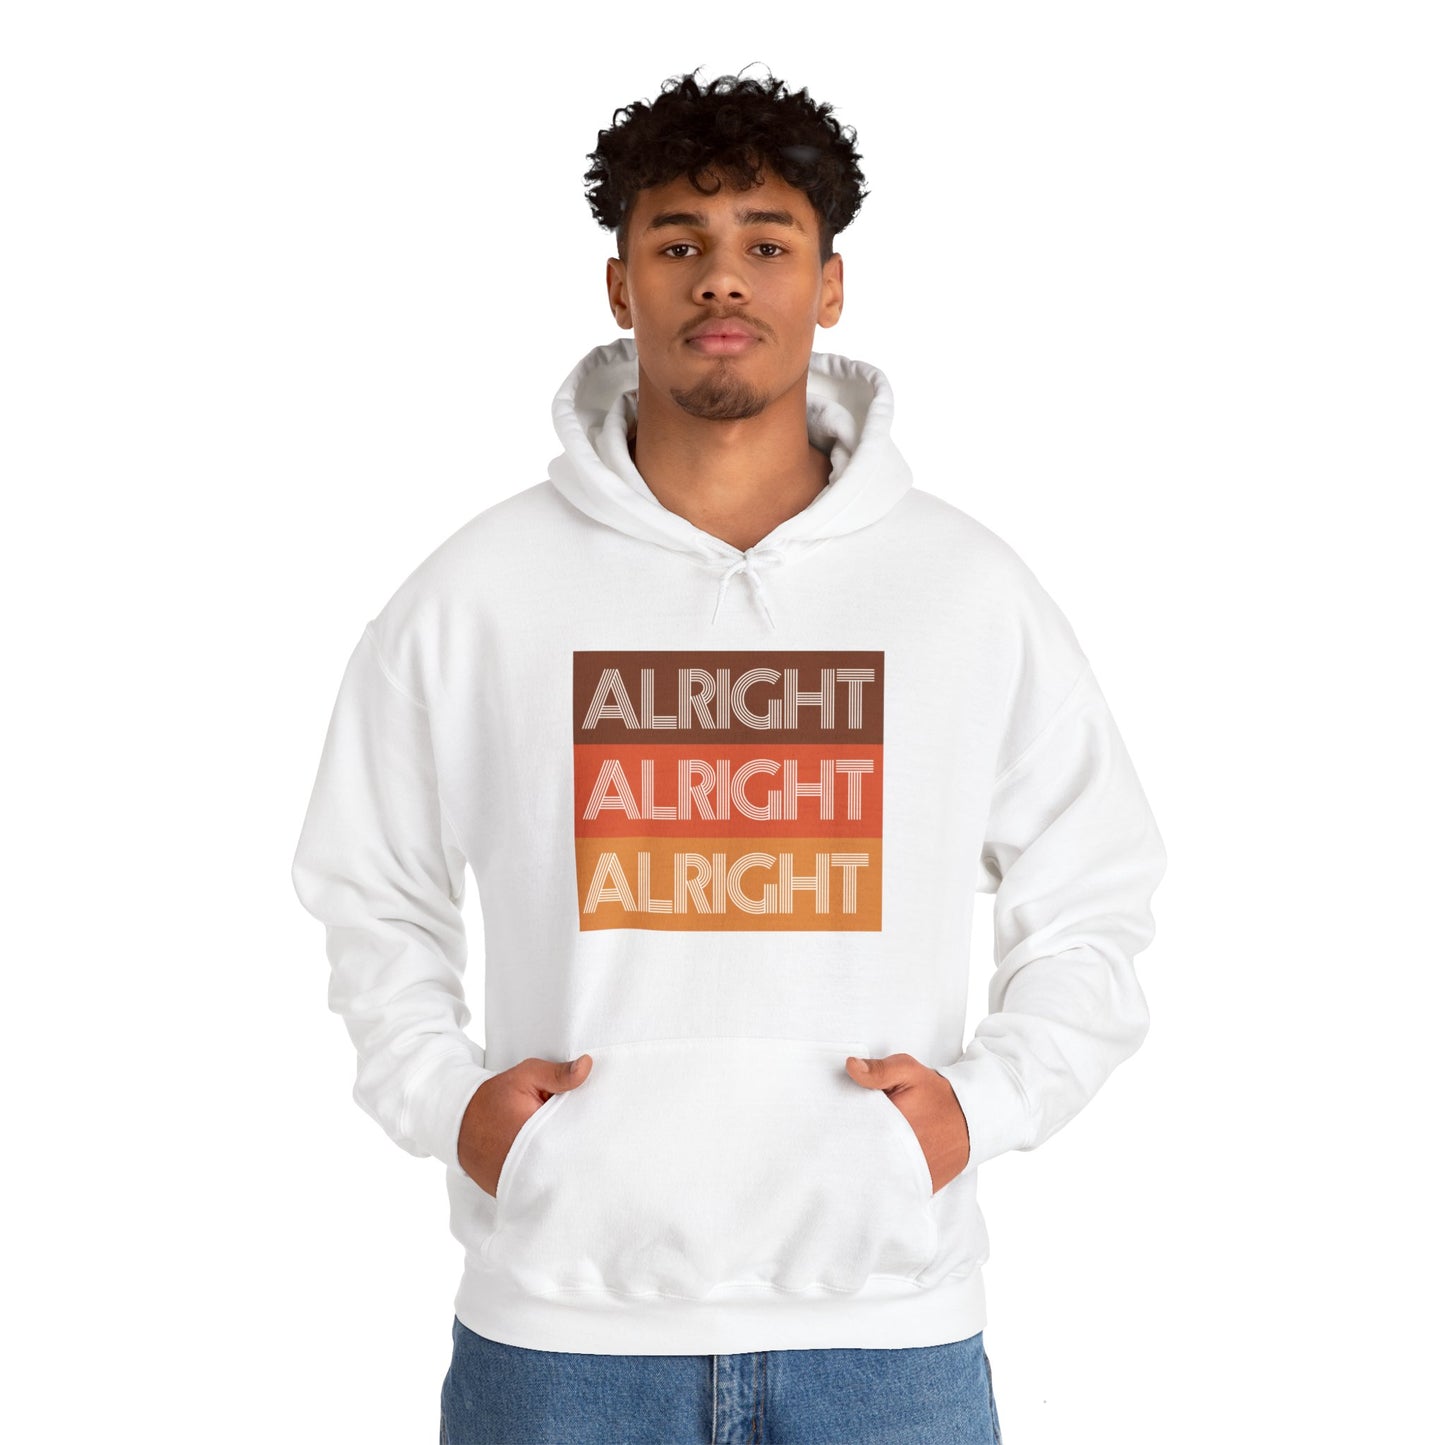 ALRIGHT ALRIGHT ALTIGHT HOODIE